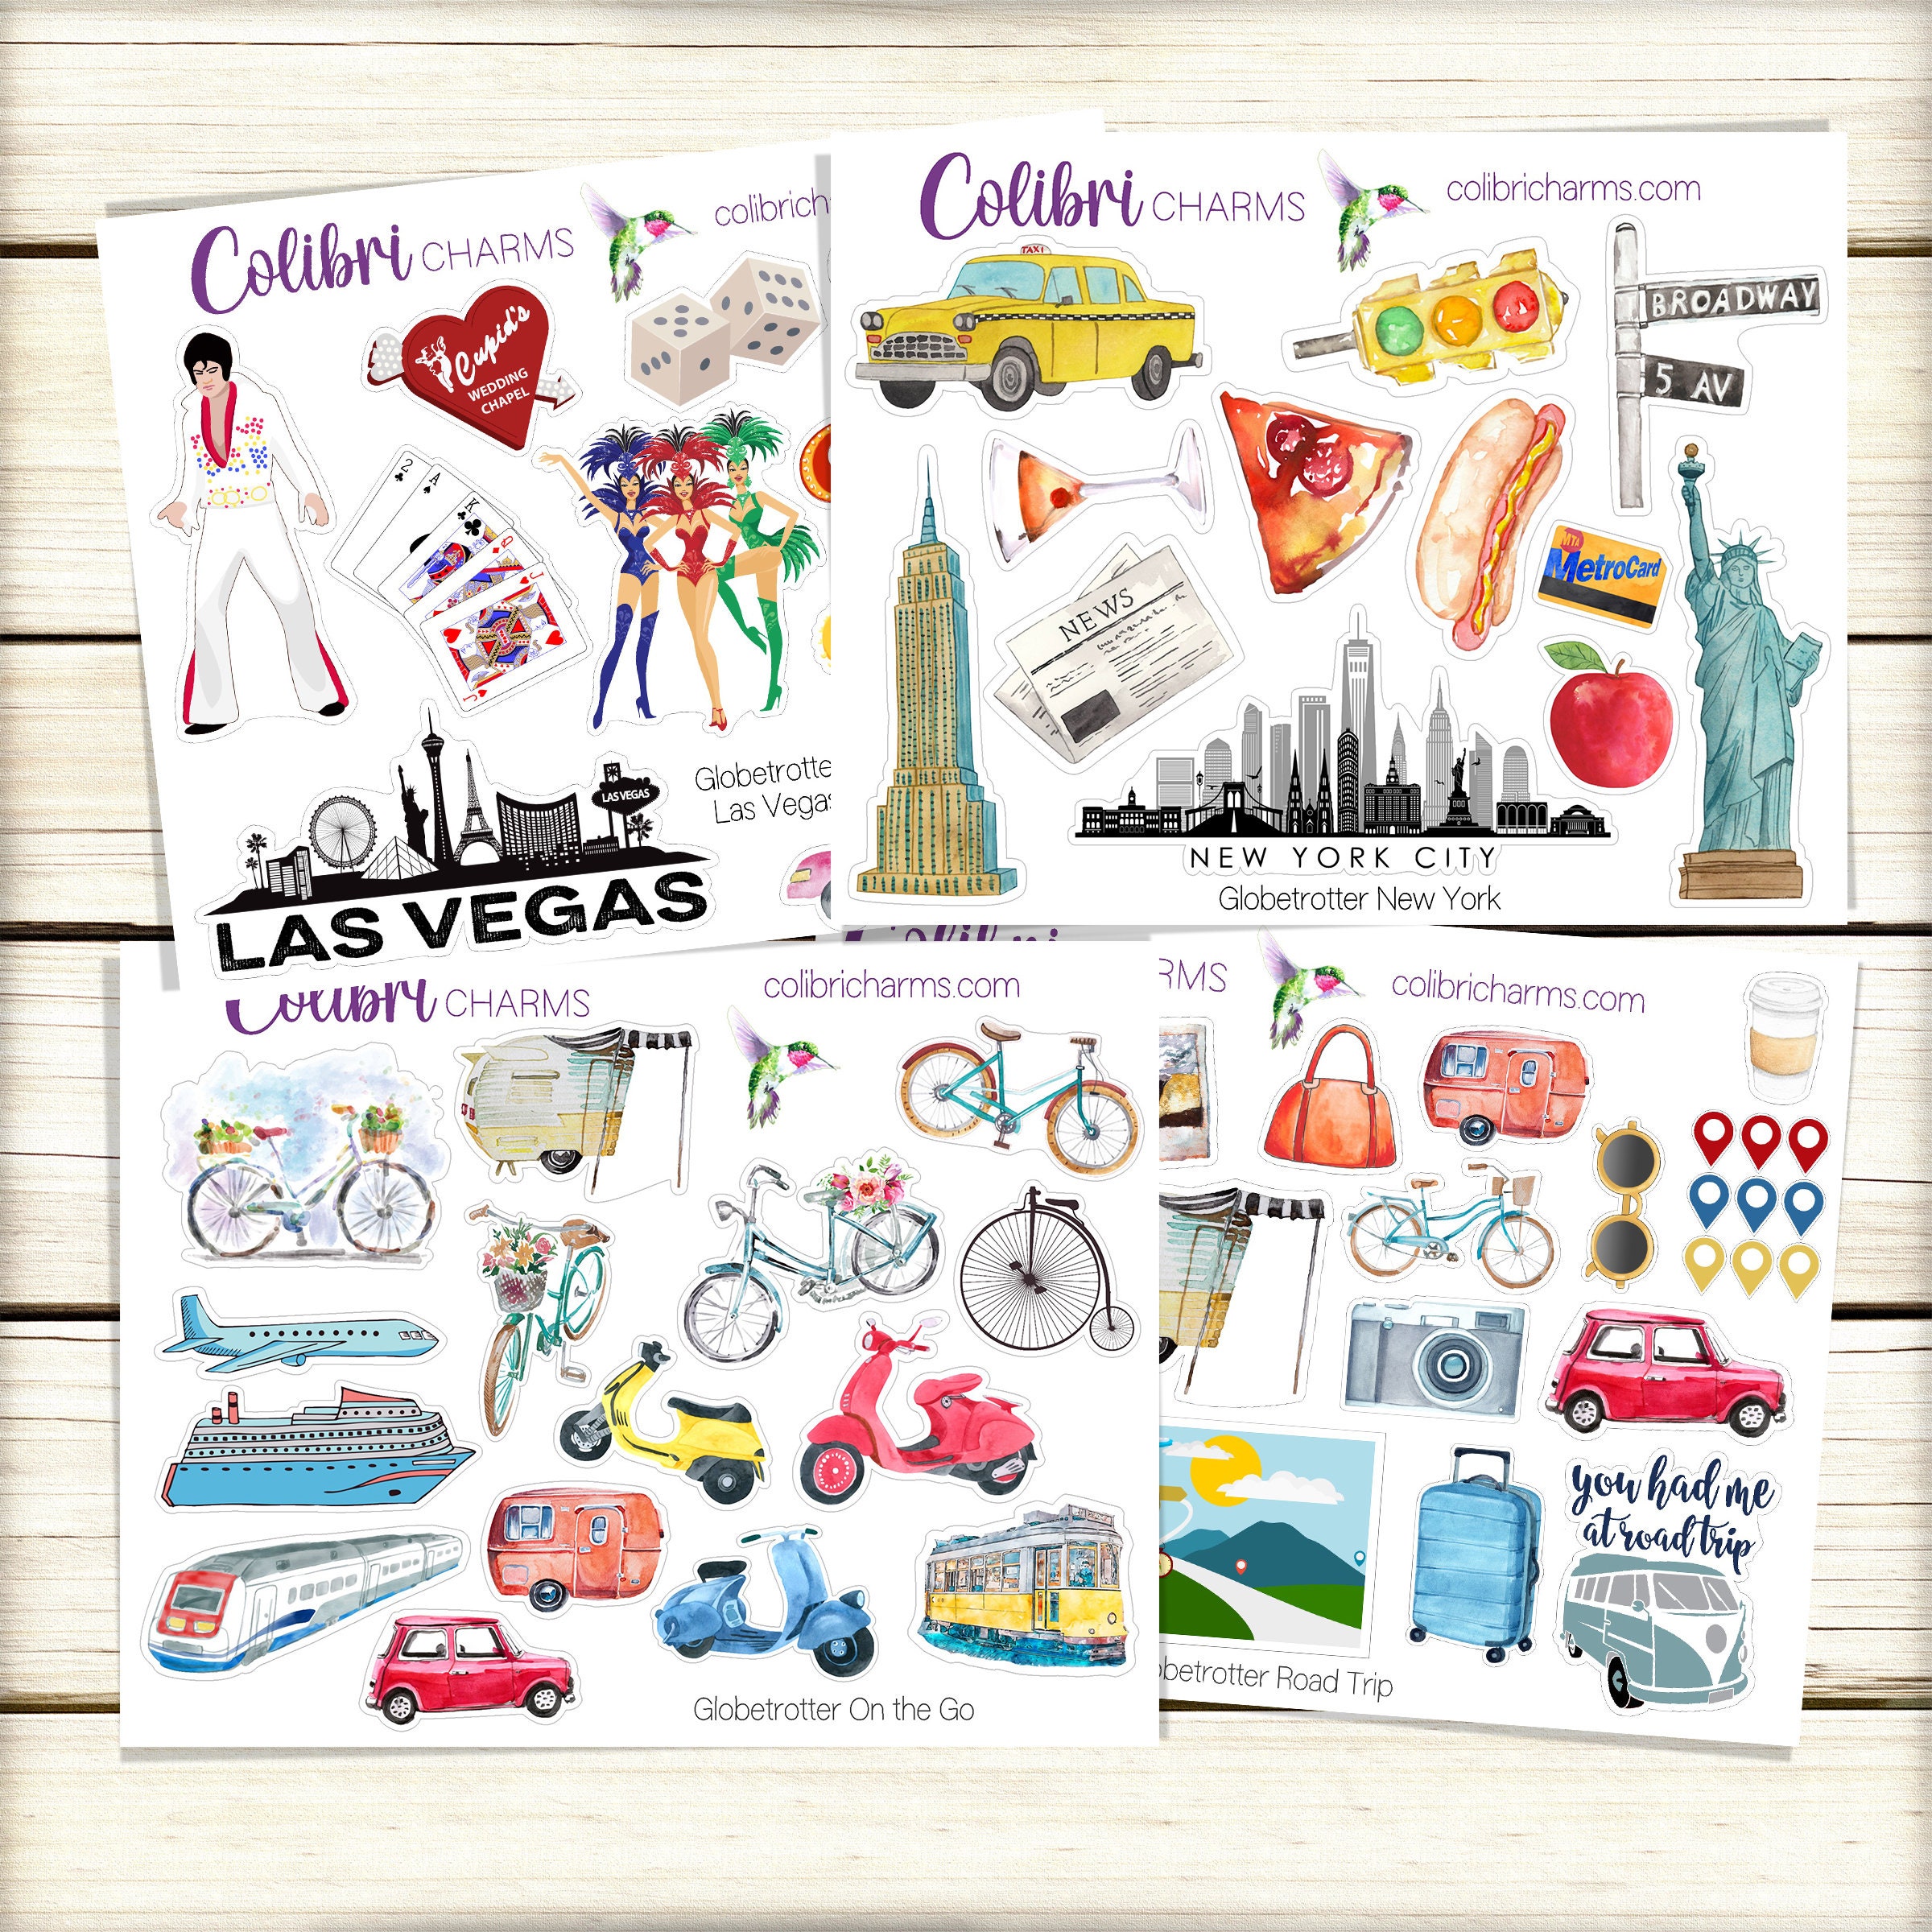 Road Trip, Travel Journal Stickers